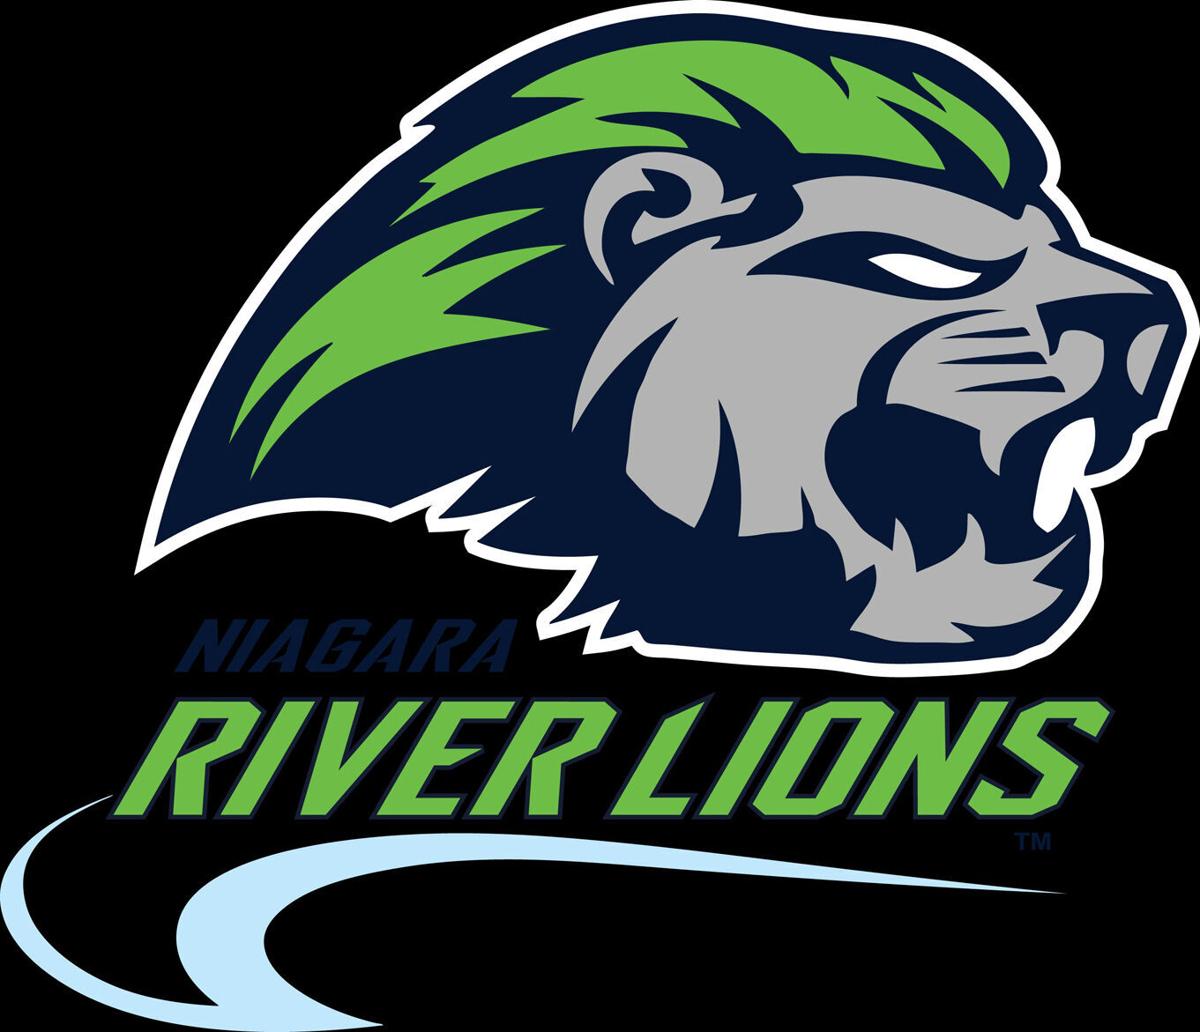 This Mascot is Ready to Roar for the Niagara River Lions